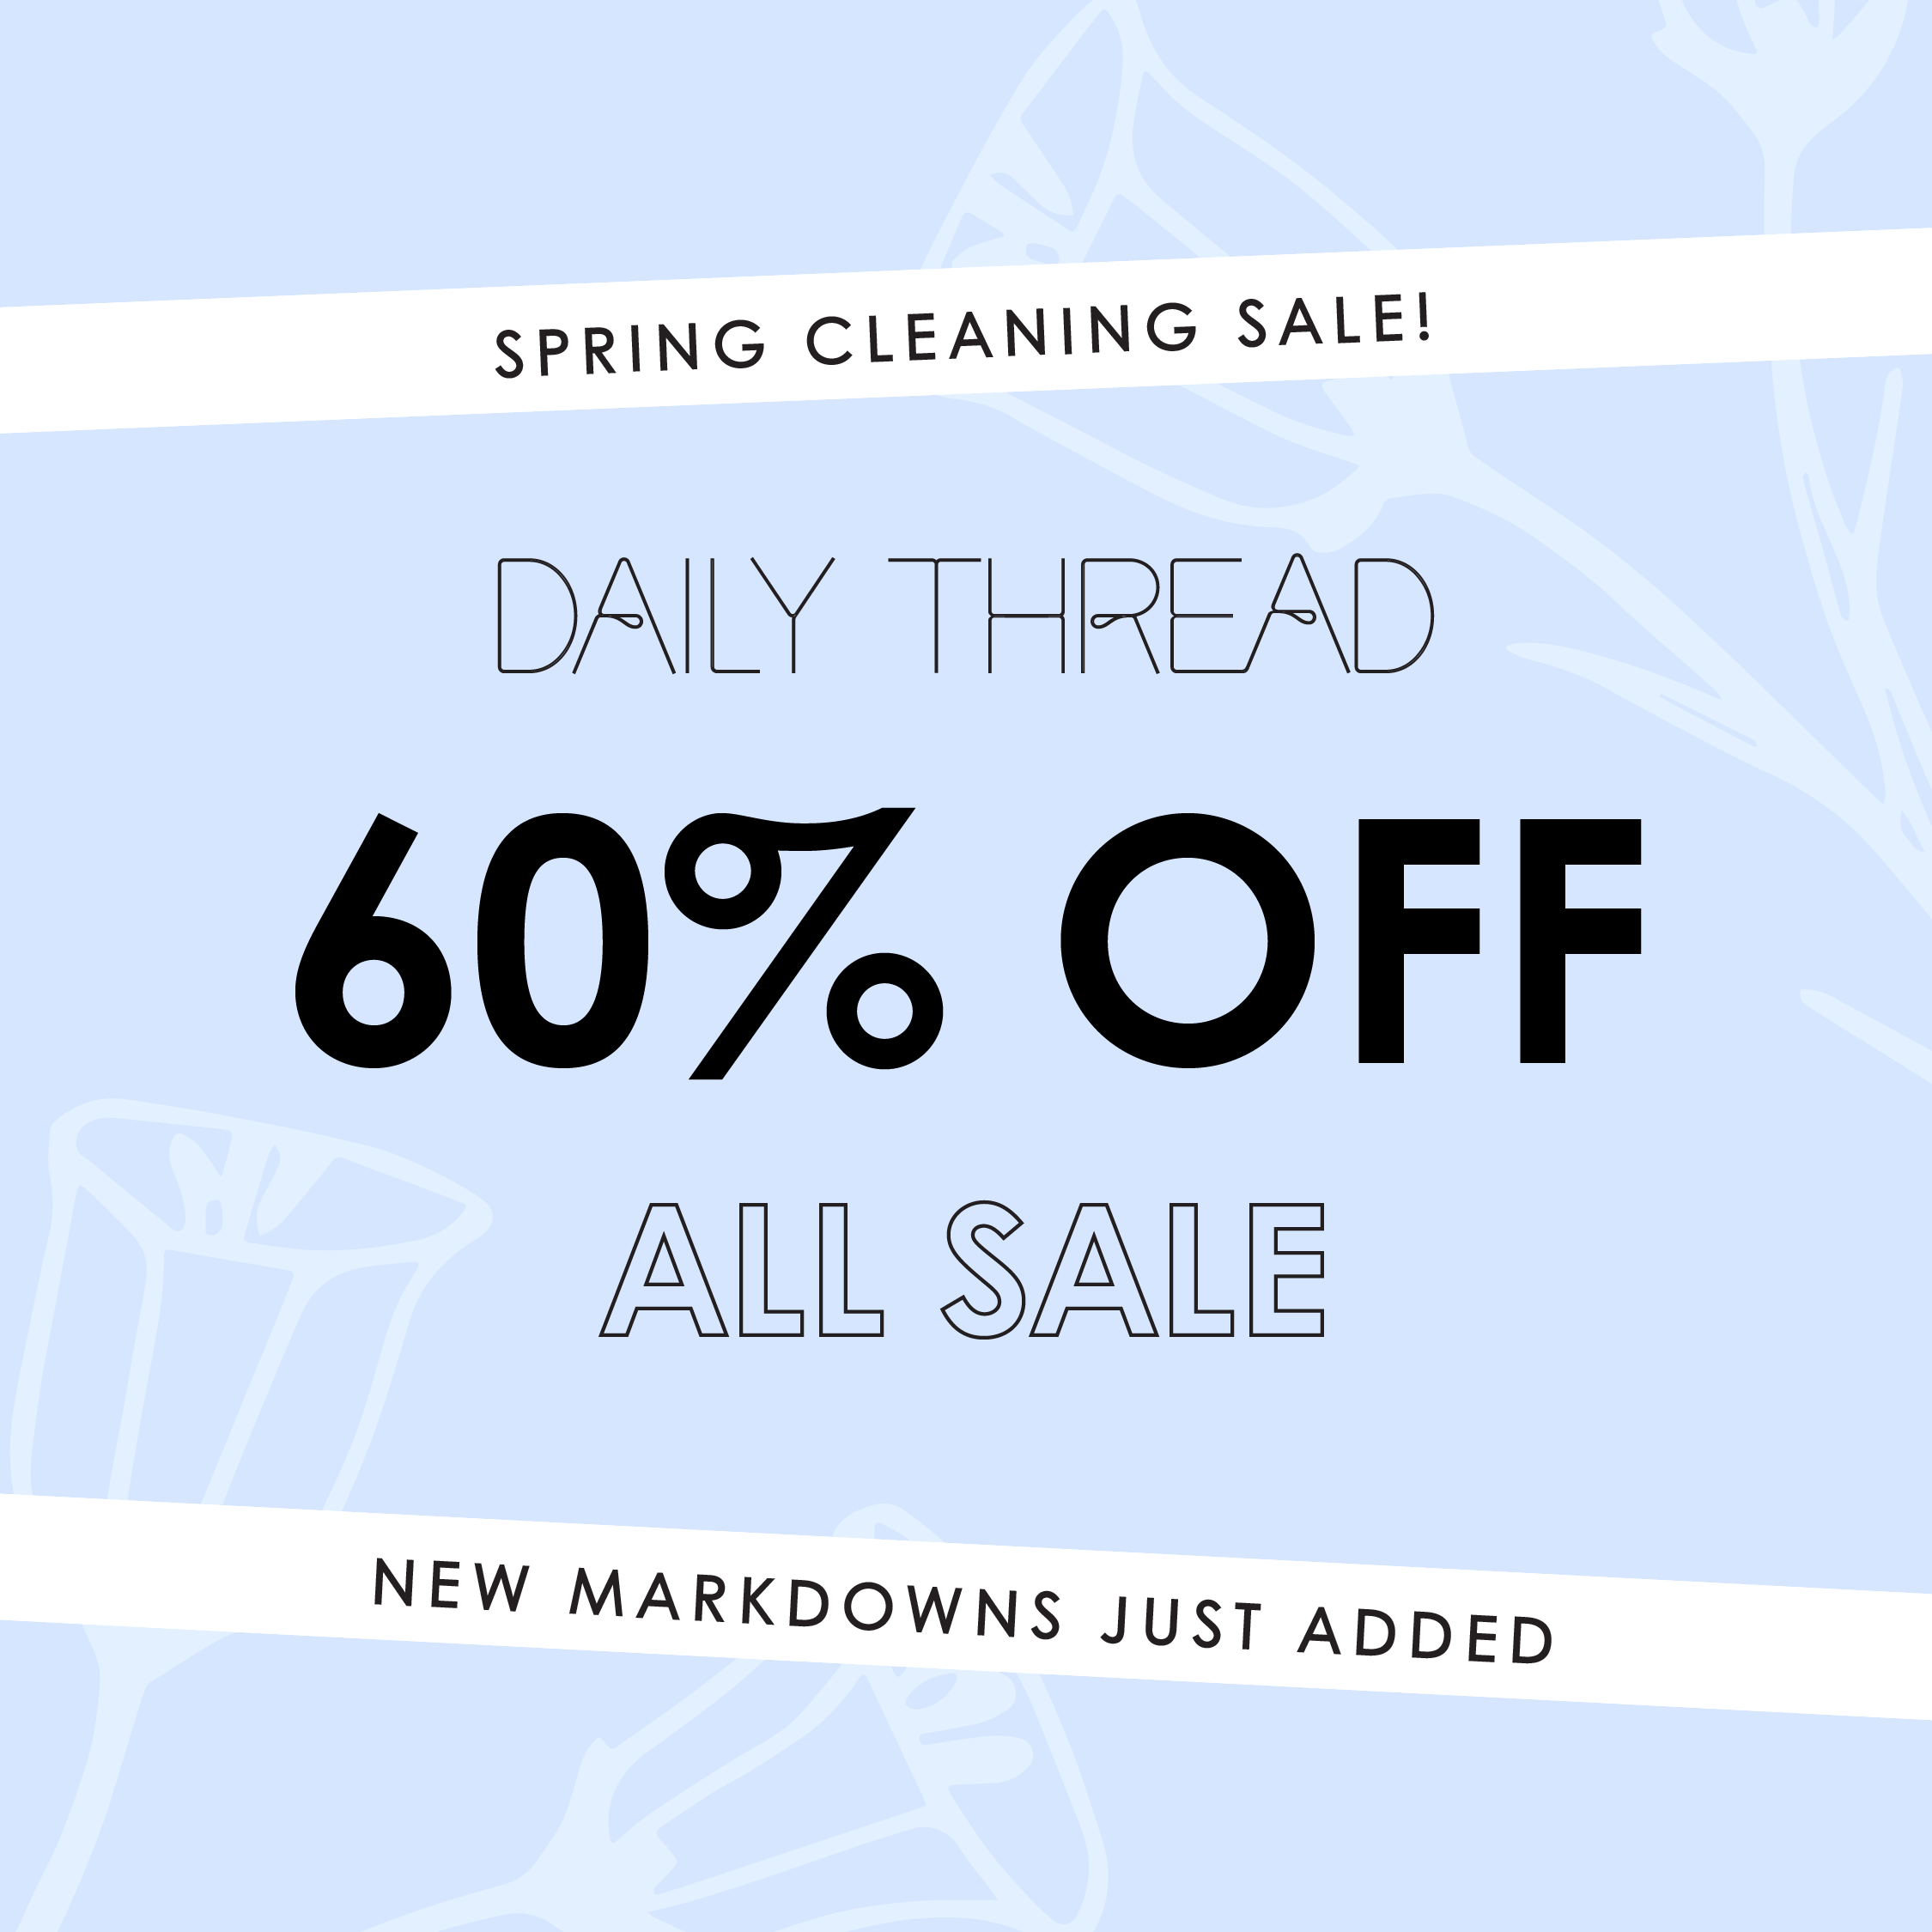 60% OFF All Sale at Daily Thread